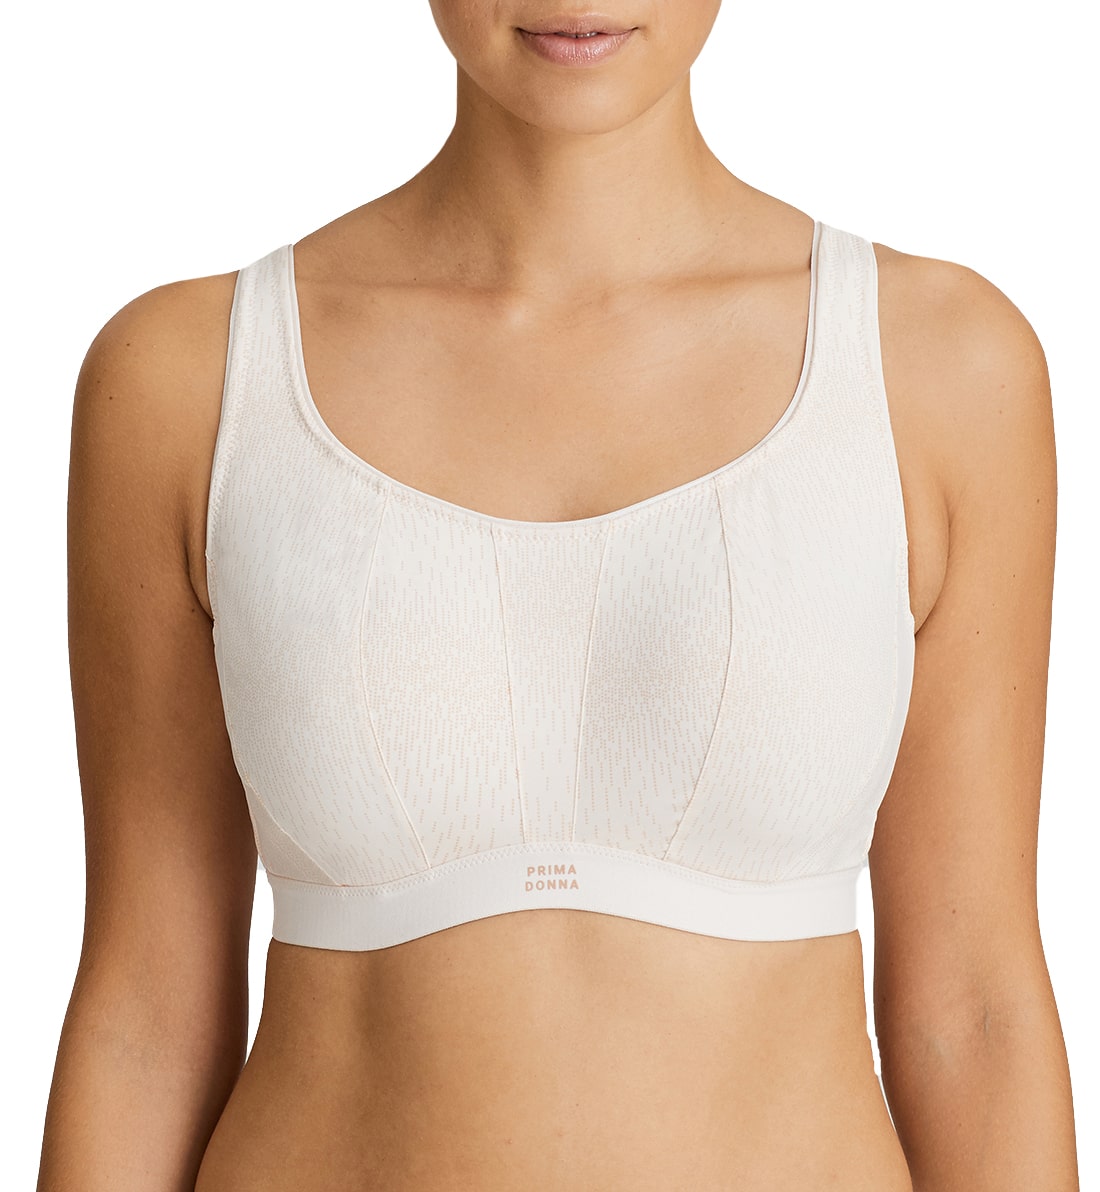 Moderate Impact Tagged primadonna - Breakout Bras